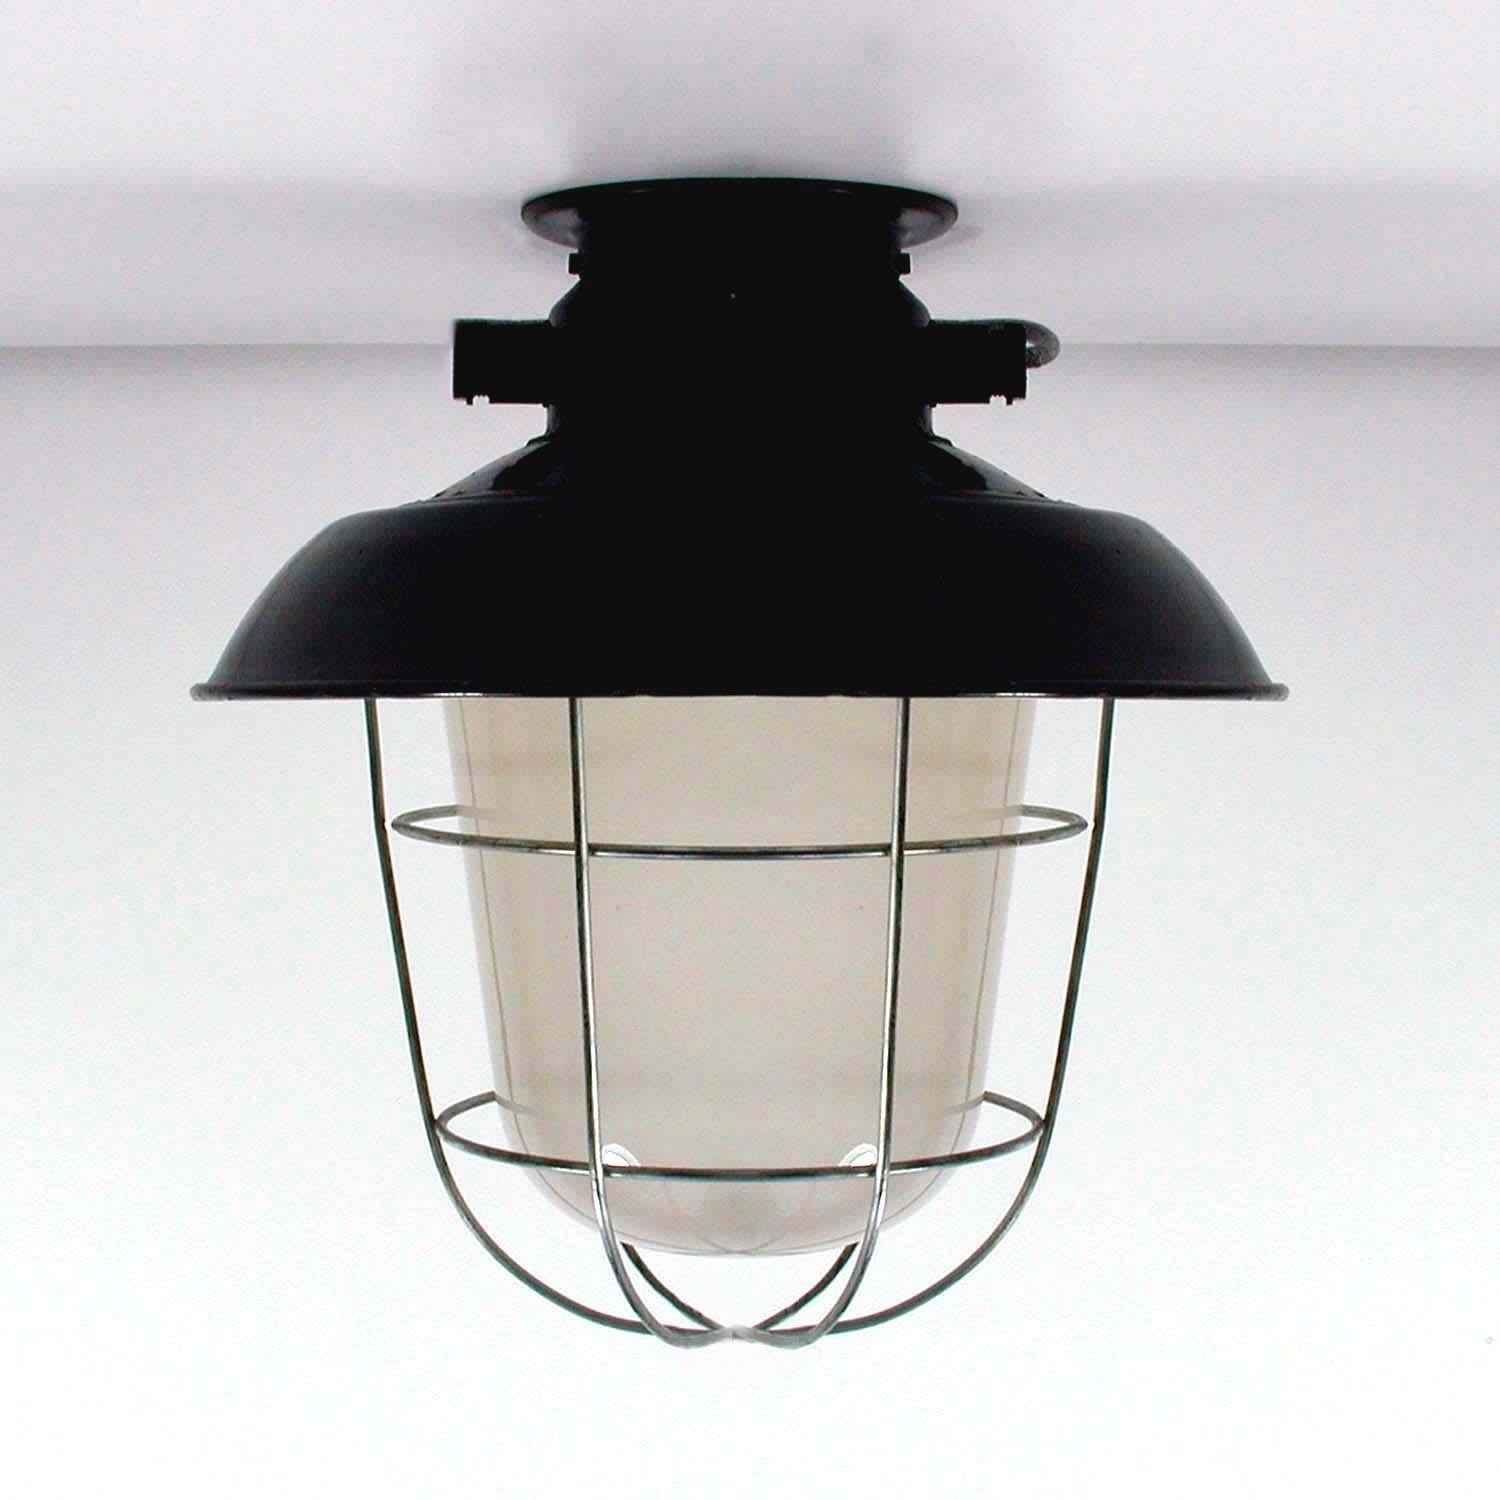 This vintage industrial flush mount was made in Germany in the 1940s to 1950s. The lamp features a black enamel lamp shade and a milk glass cylinder to protect the bulb. The lamp can be used as a ceiling light as well as a desk or table lamp.
   